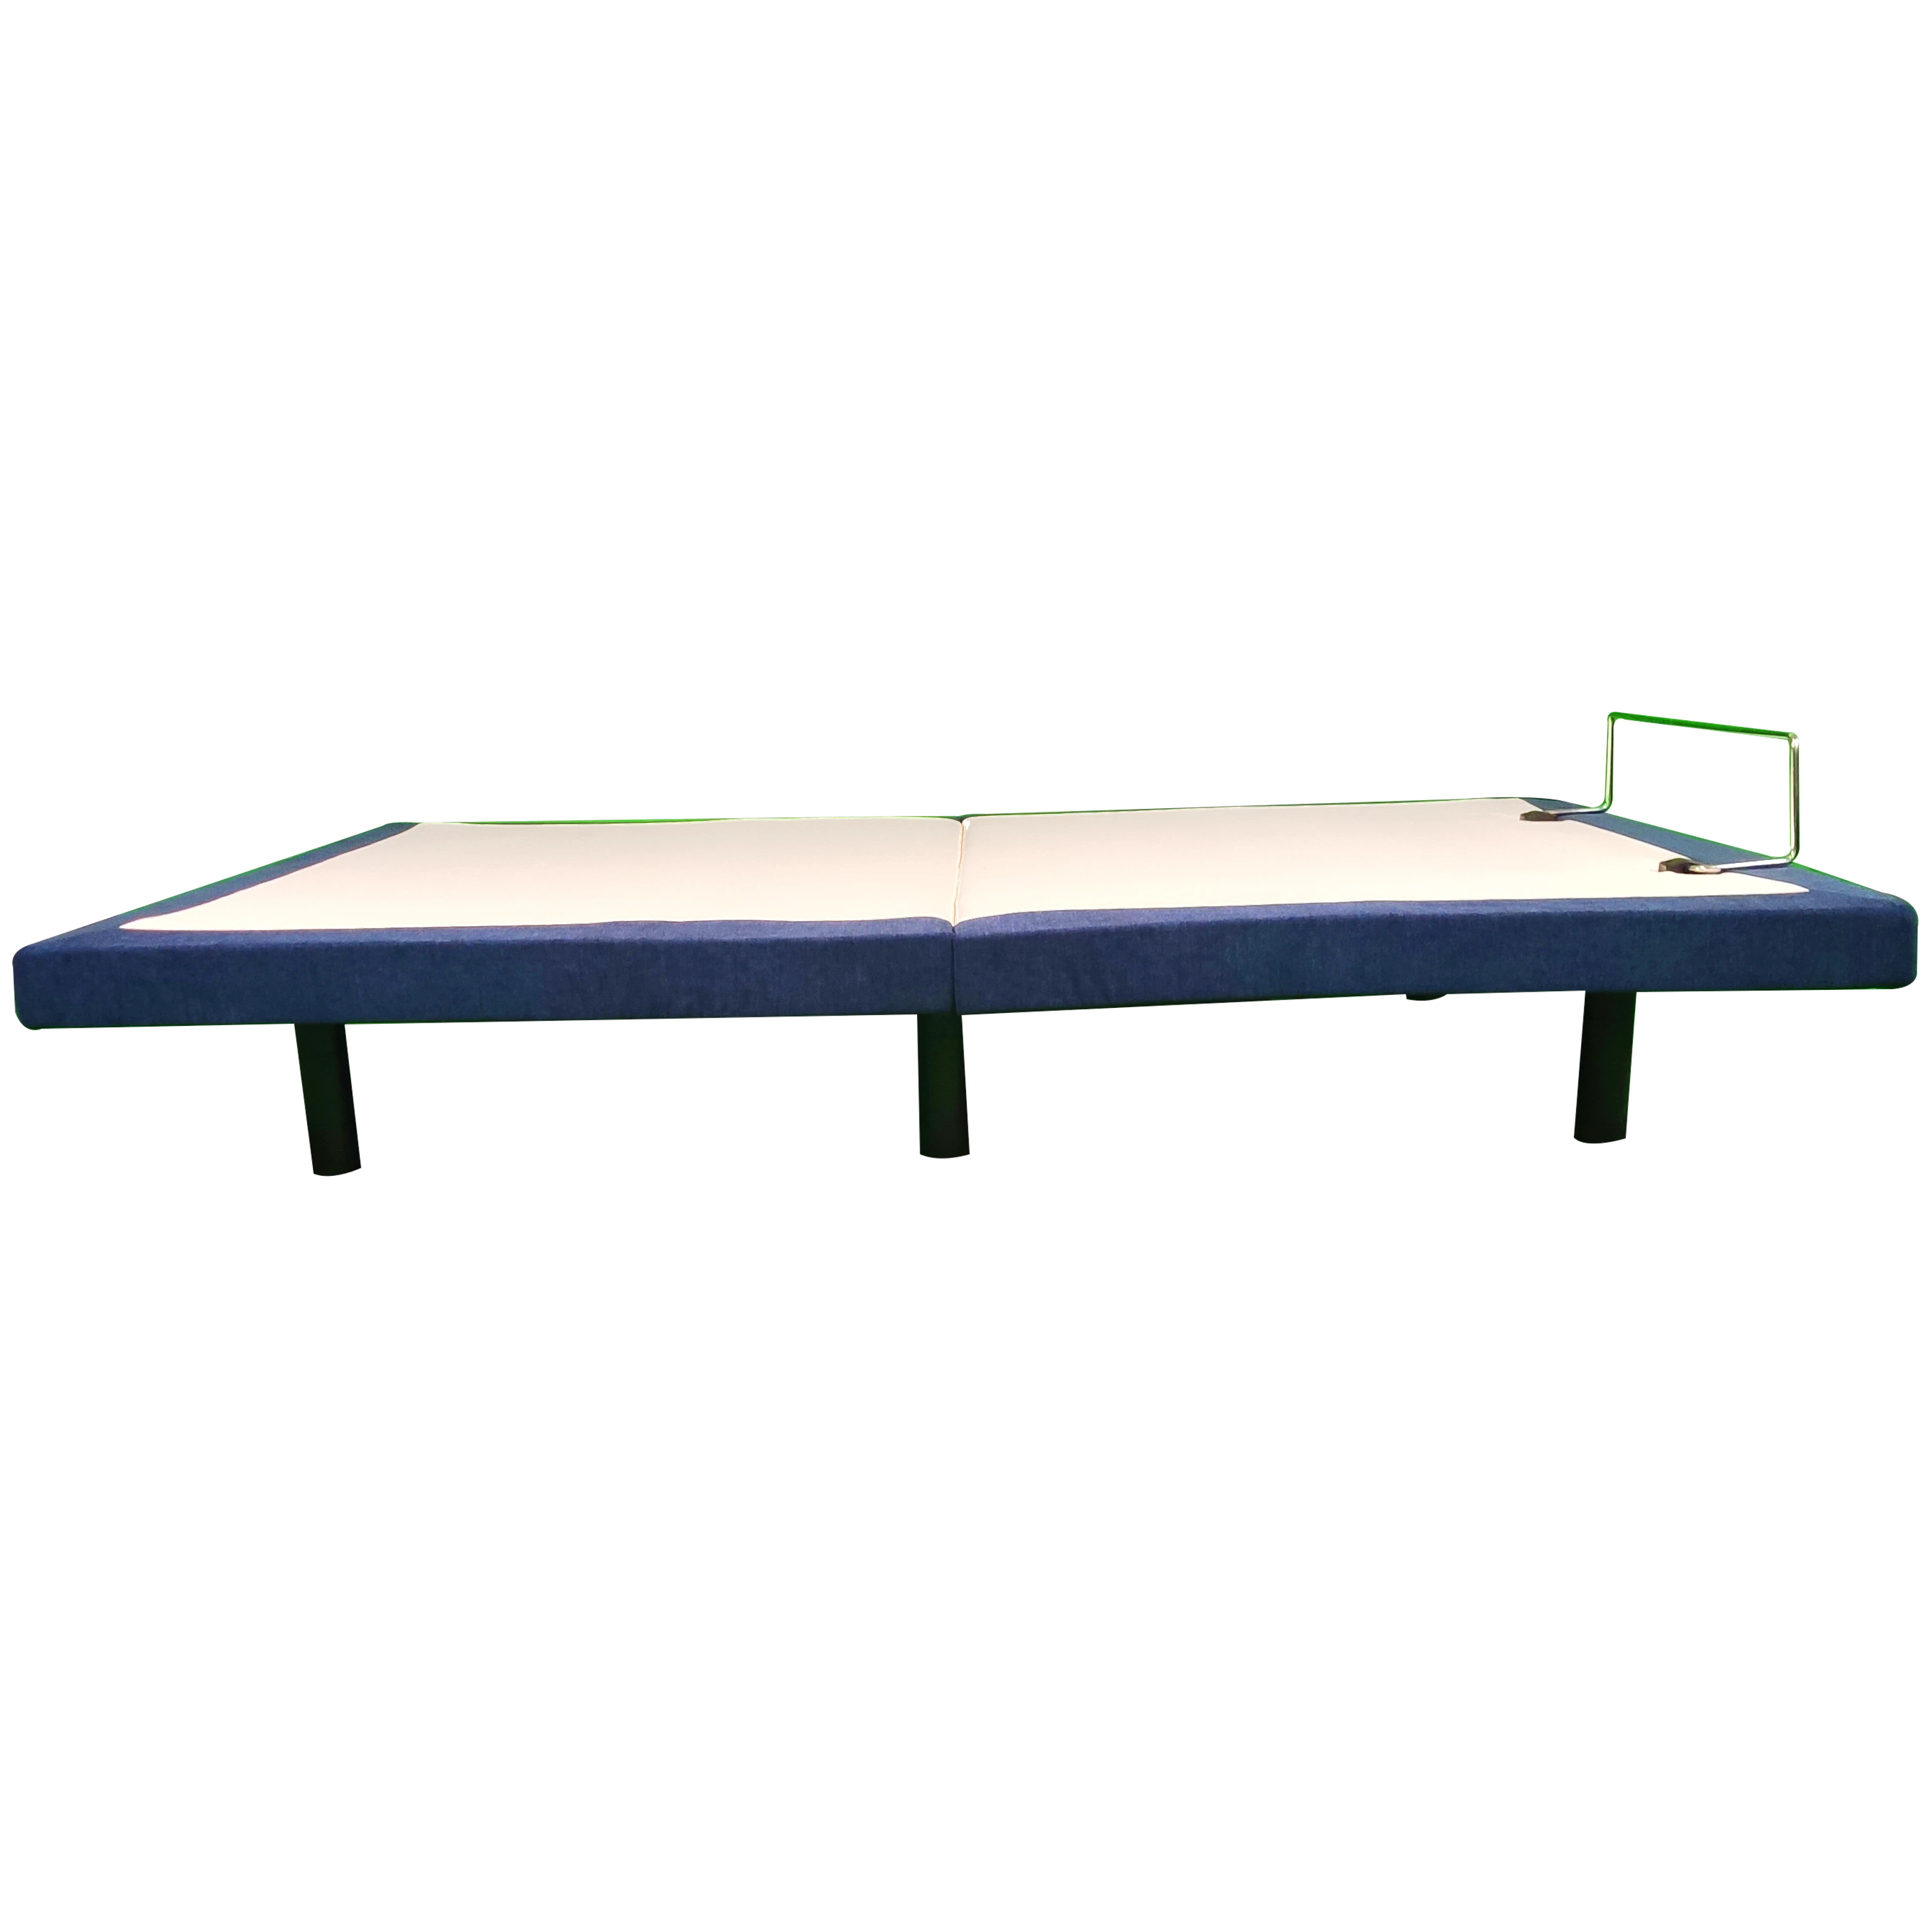 User-friendly adjustable electric bed for home furniture